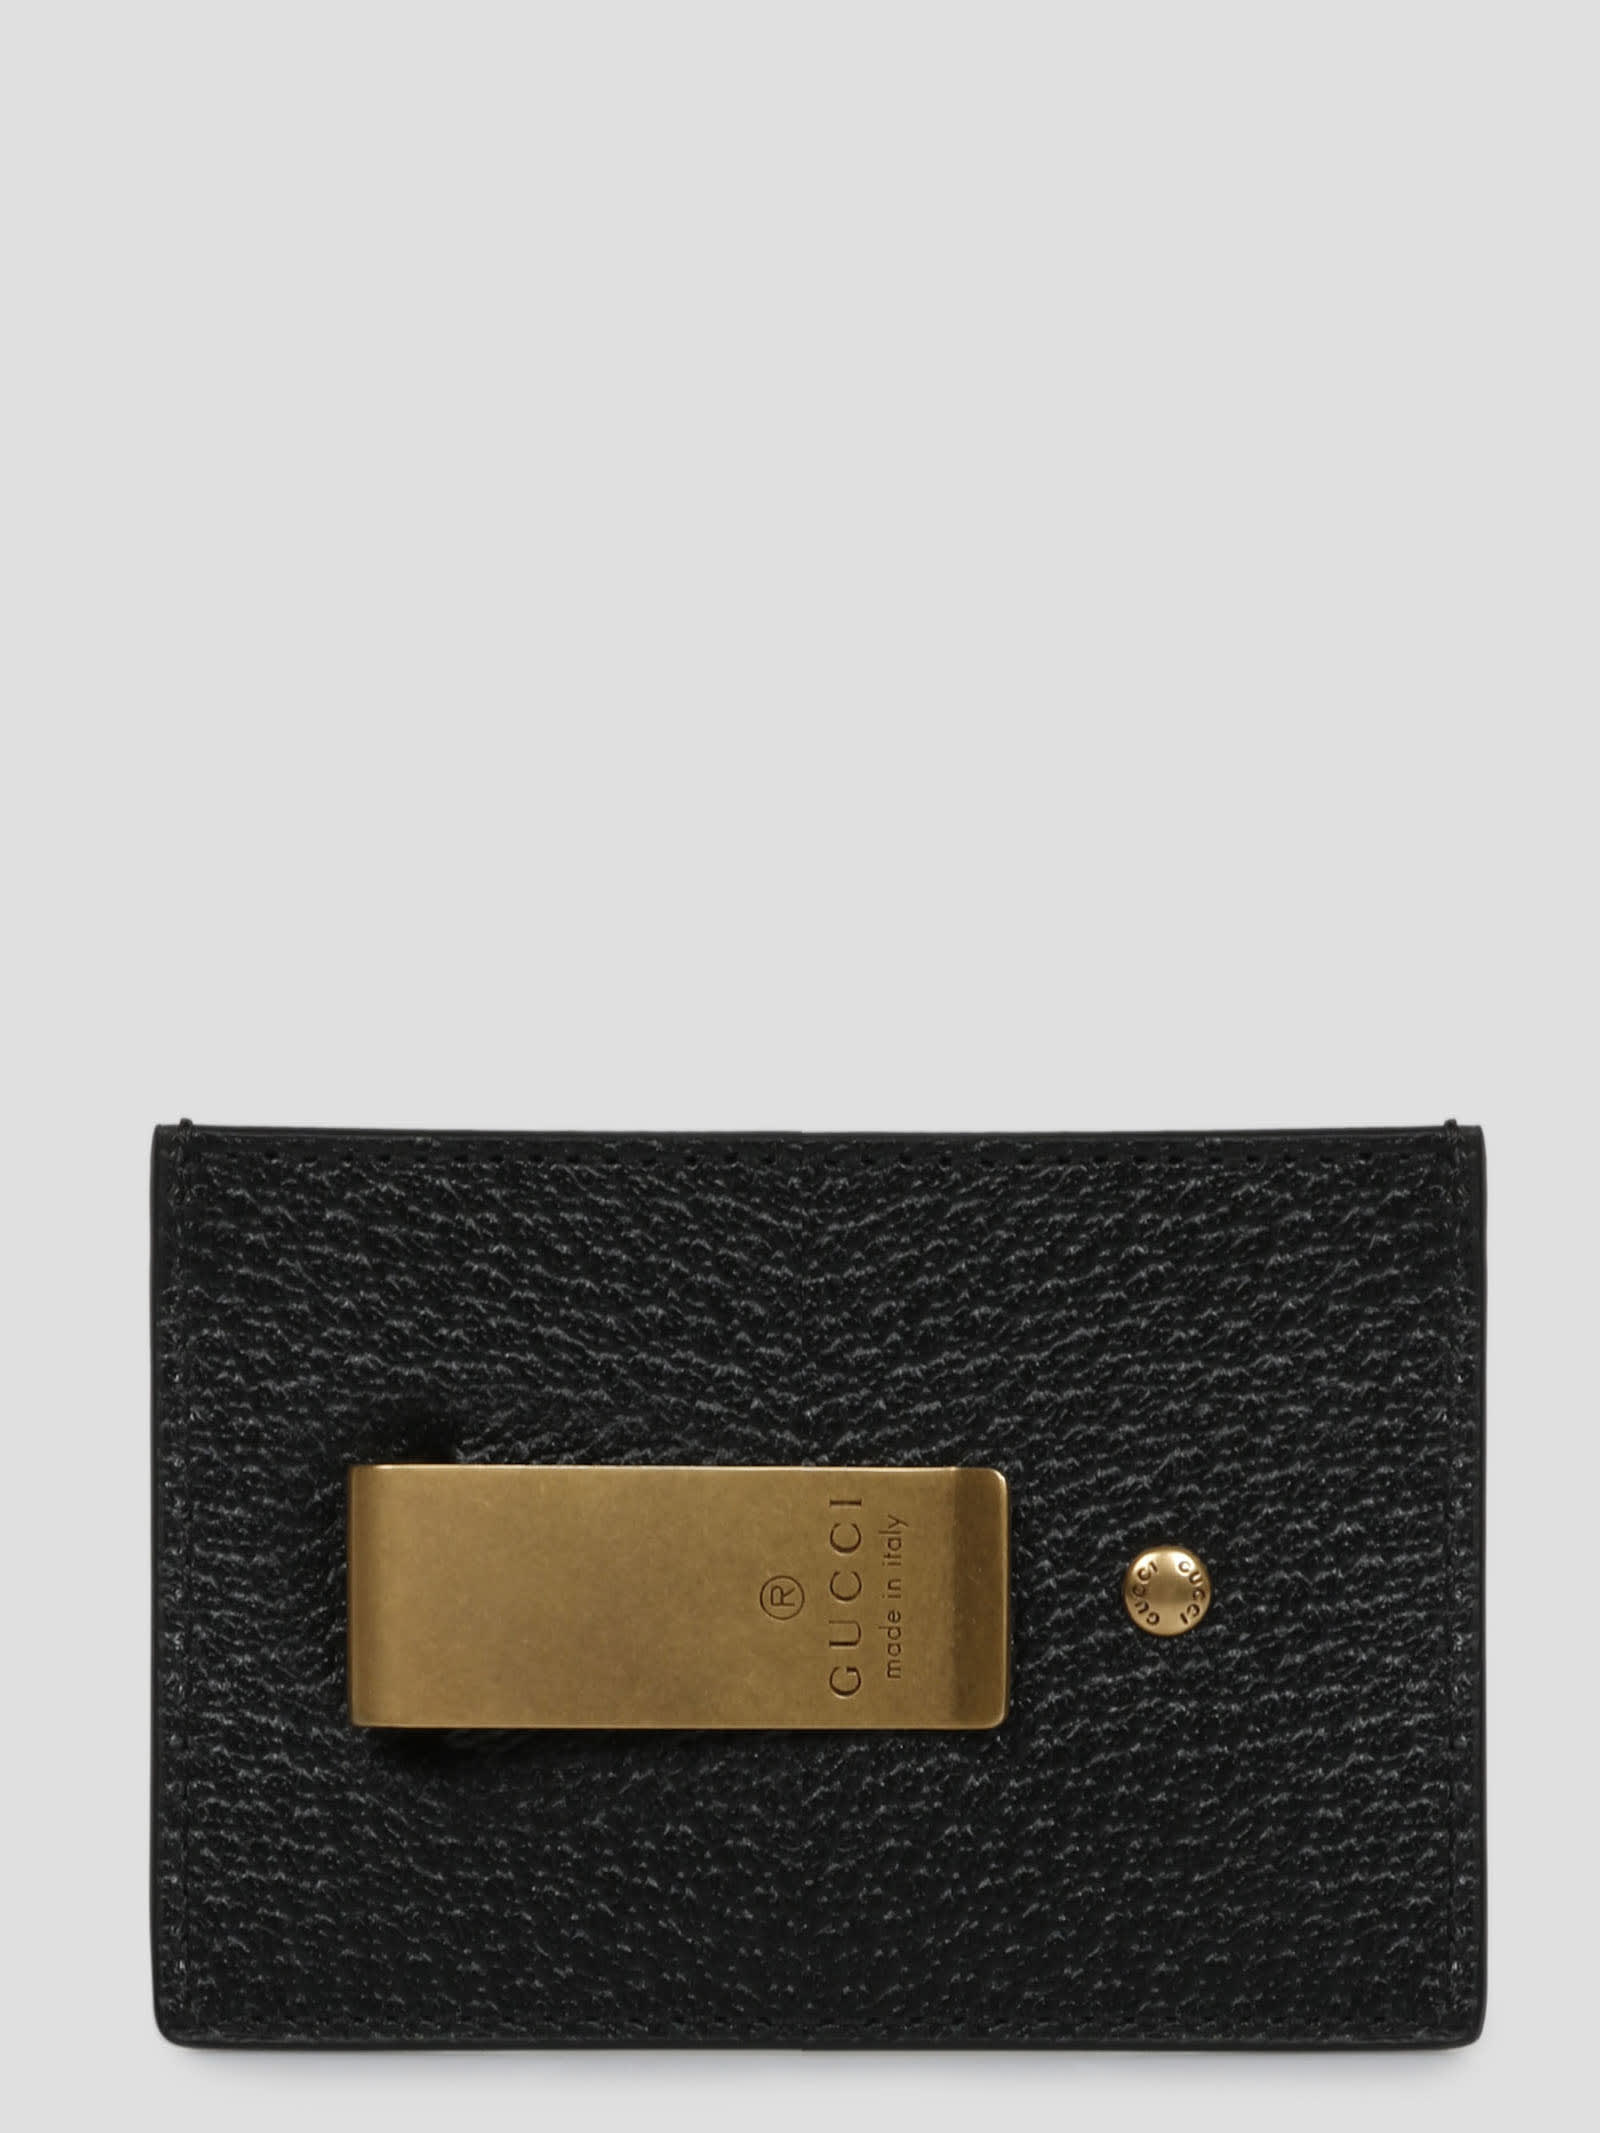 Gucci Gg Marmont Leather Money Clip In Black